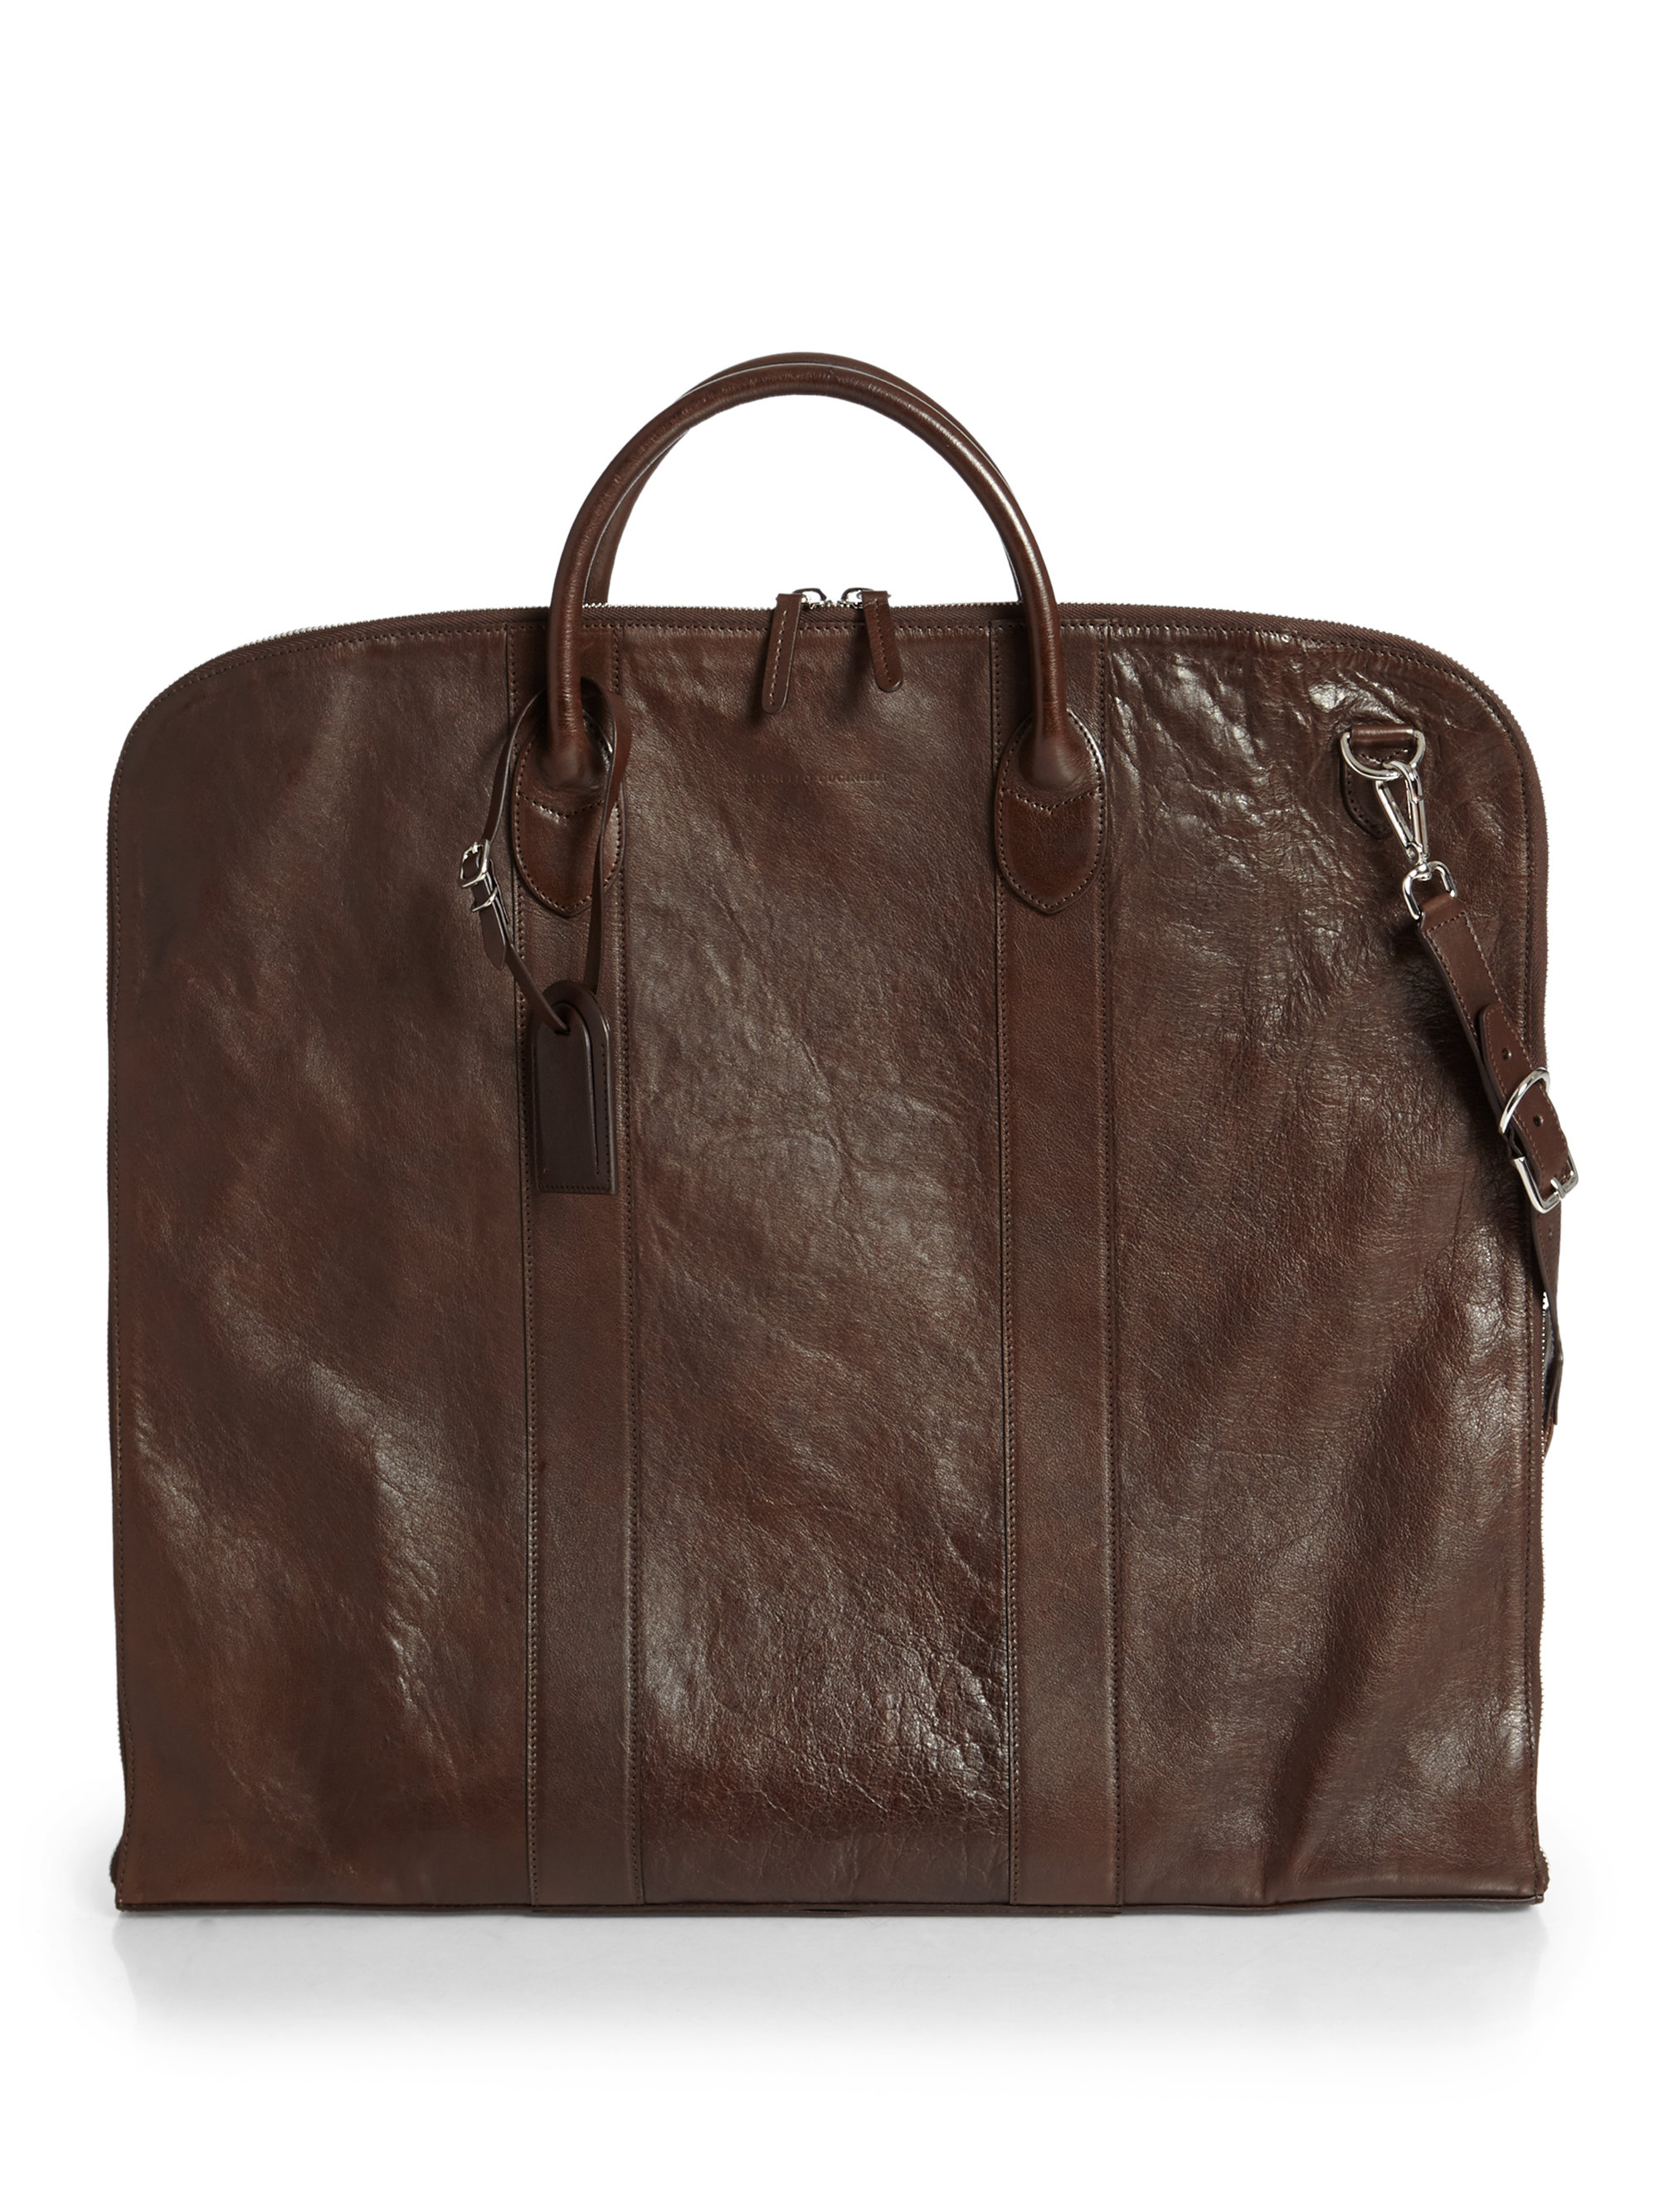 Lyst - Brunello Cucinelli Buffed Leather & Cotton Garment Bag in Brown ...